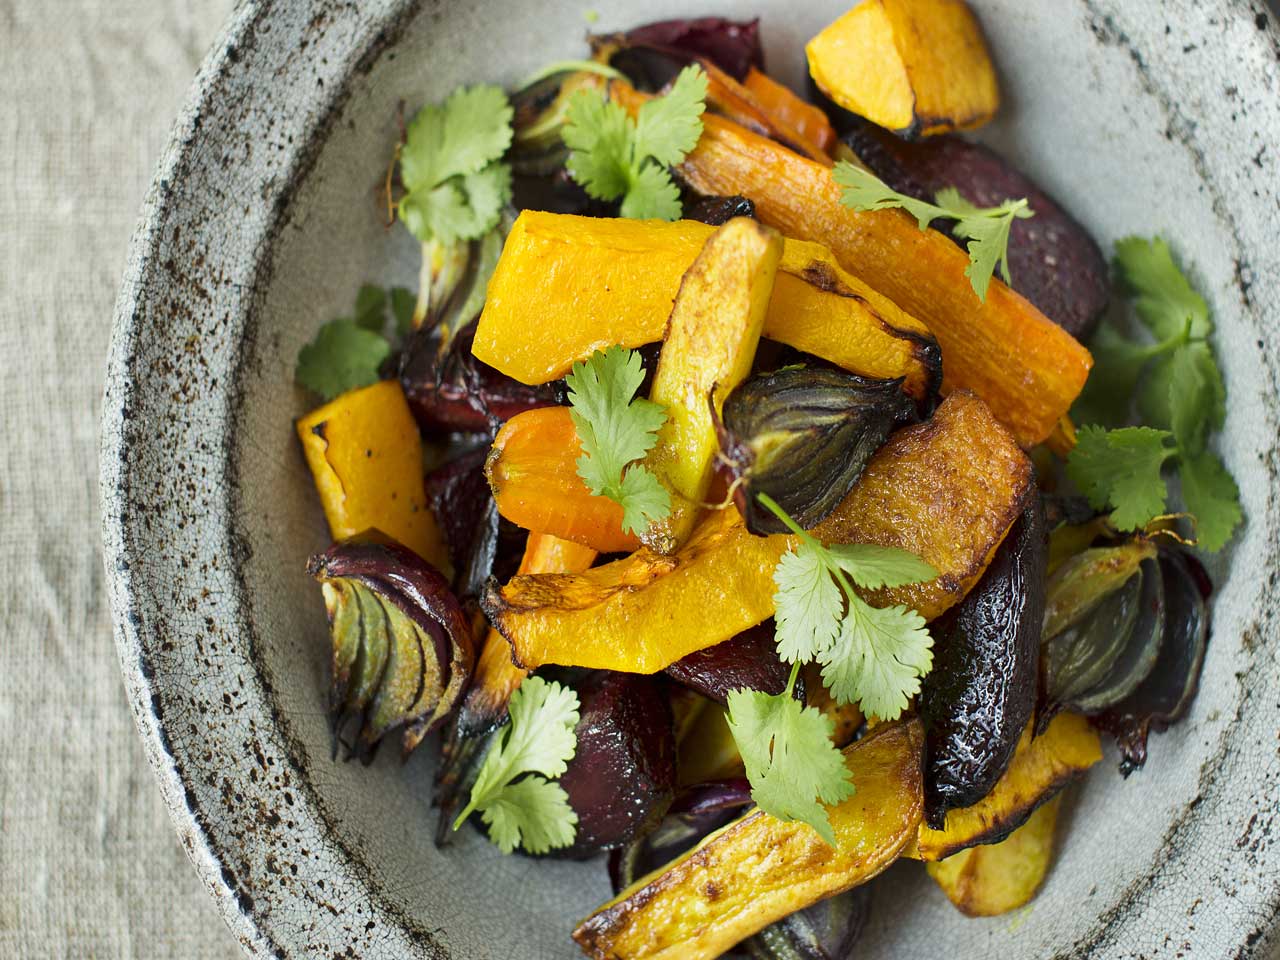 Roast vegetables with Indian spices